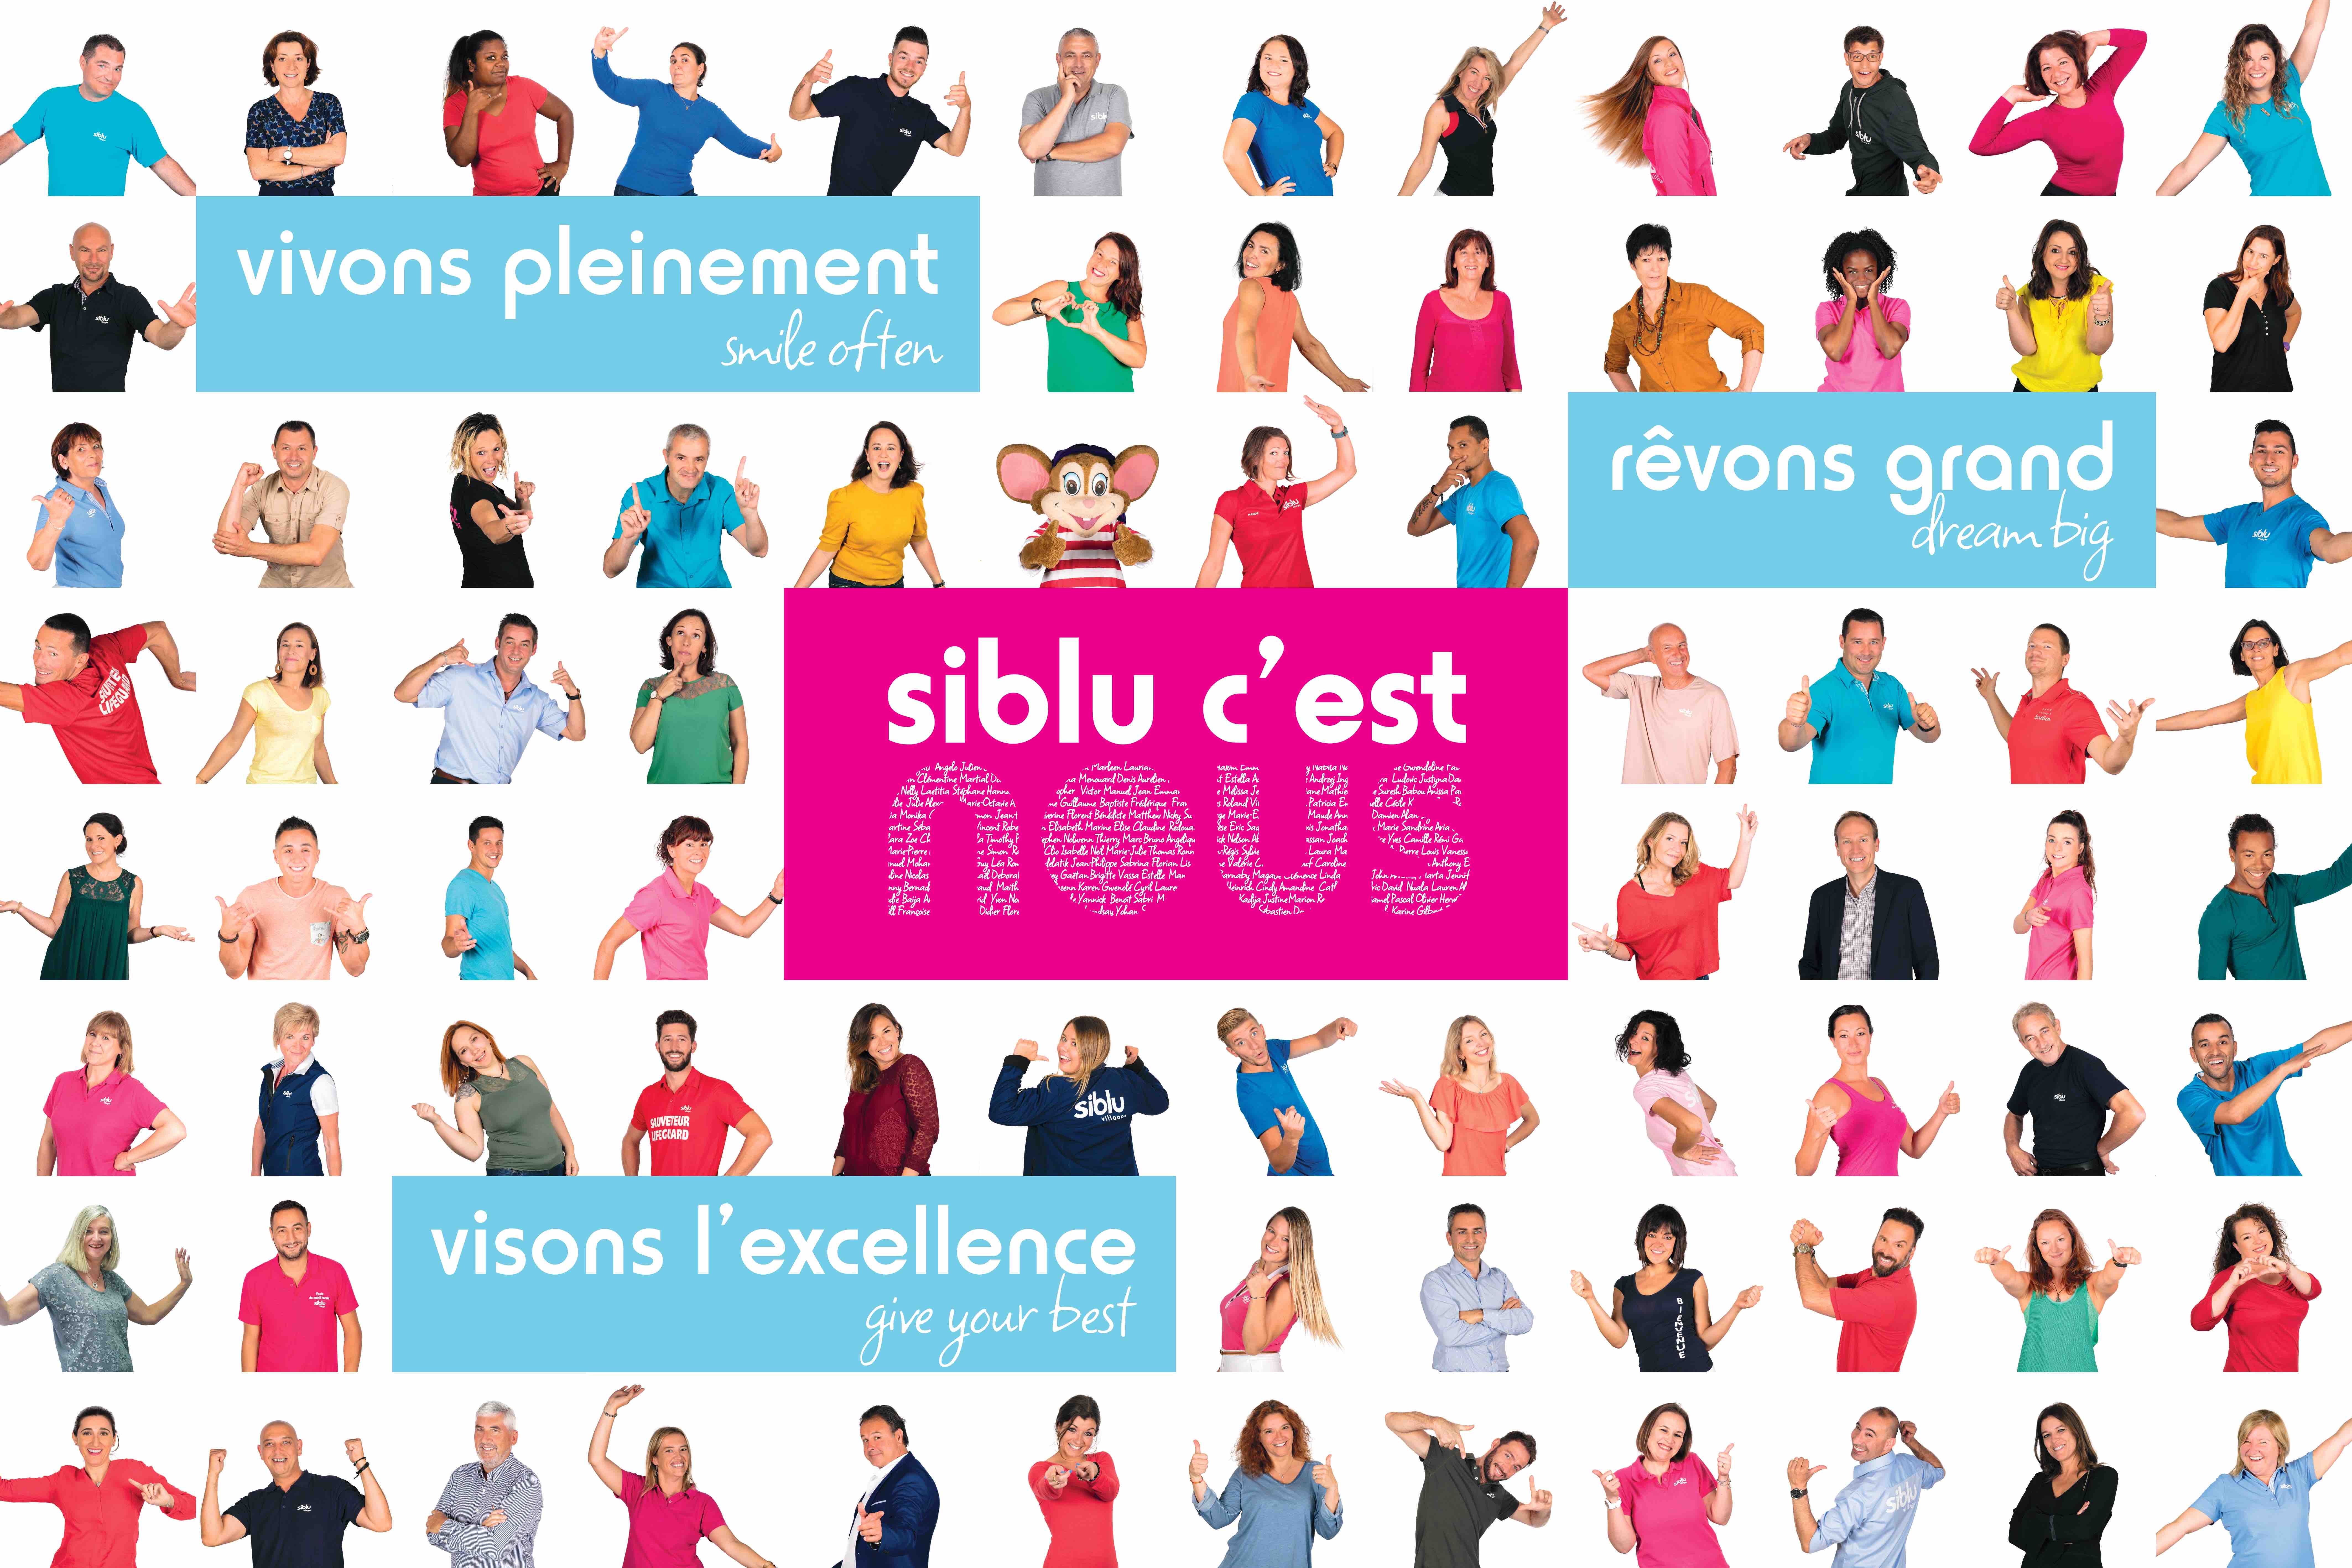 Making values come to life: we are SIBLU!